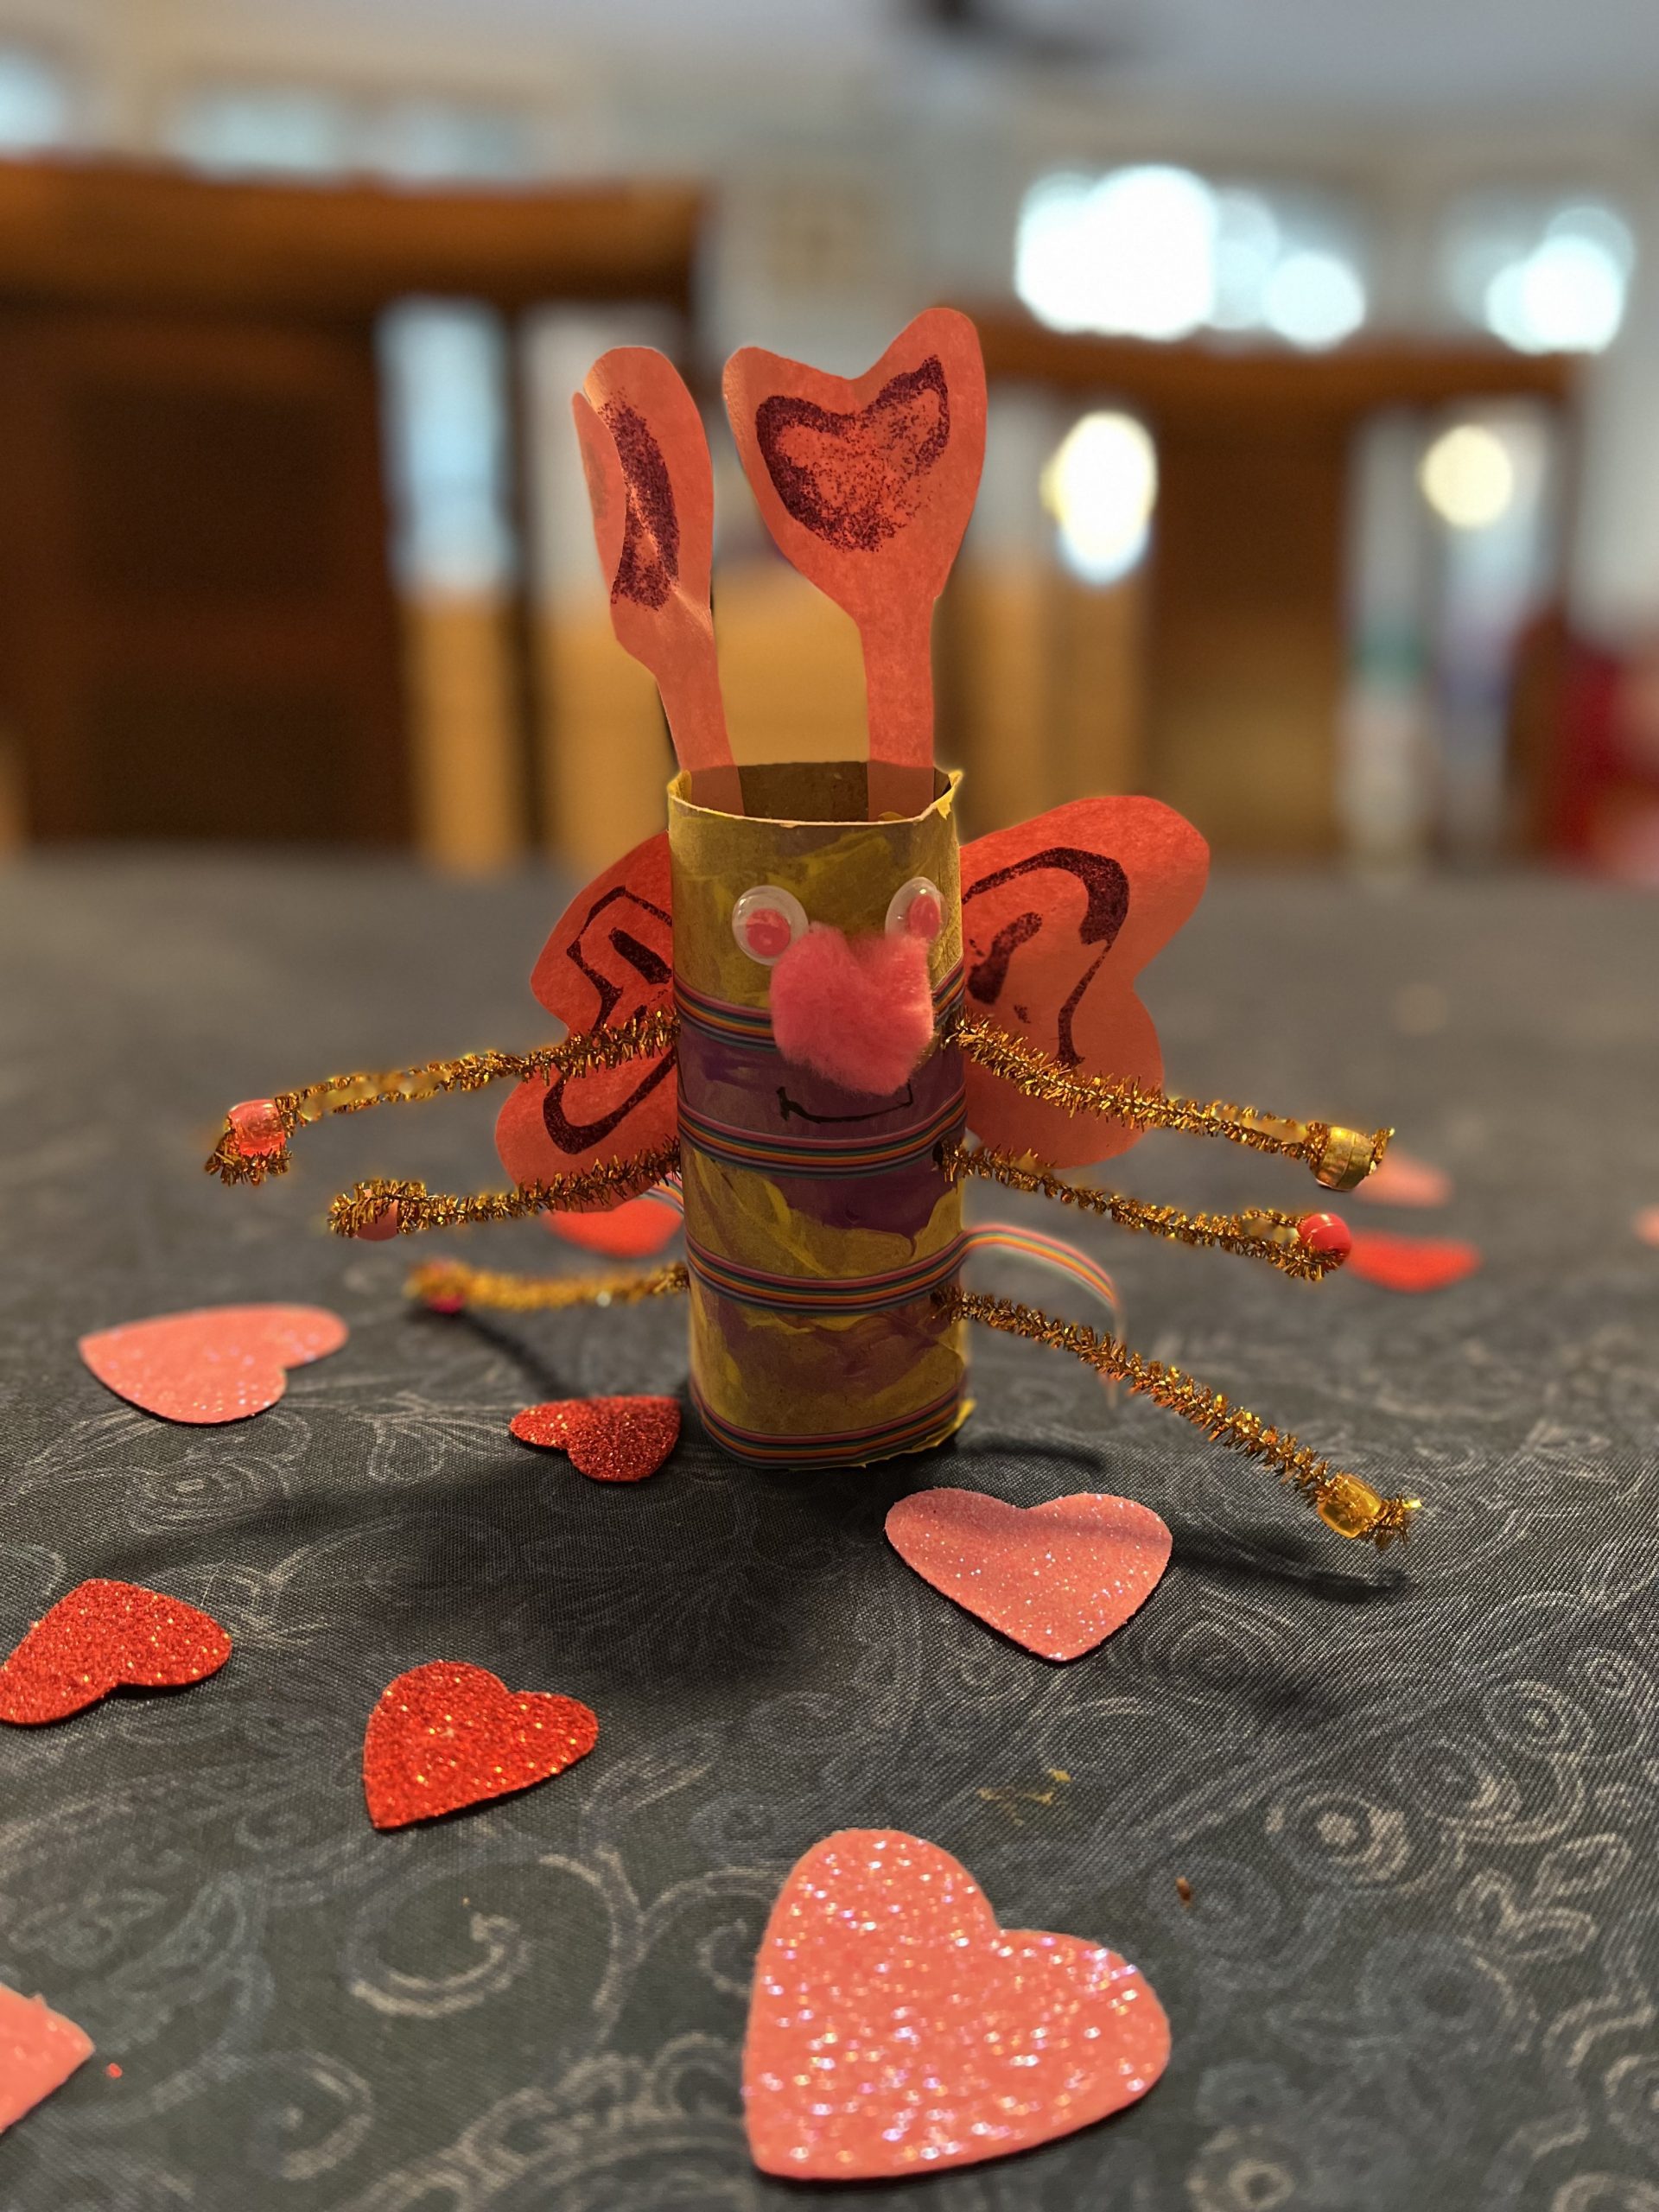 A cardboard roll with pipe cleaners coming out of the sides like arms and painted to look like a bug with paper antennae and wings